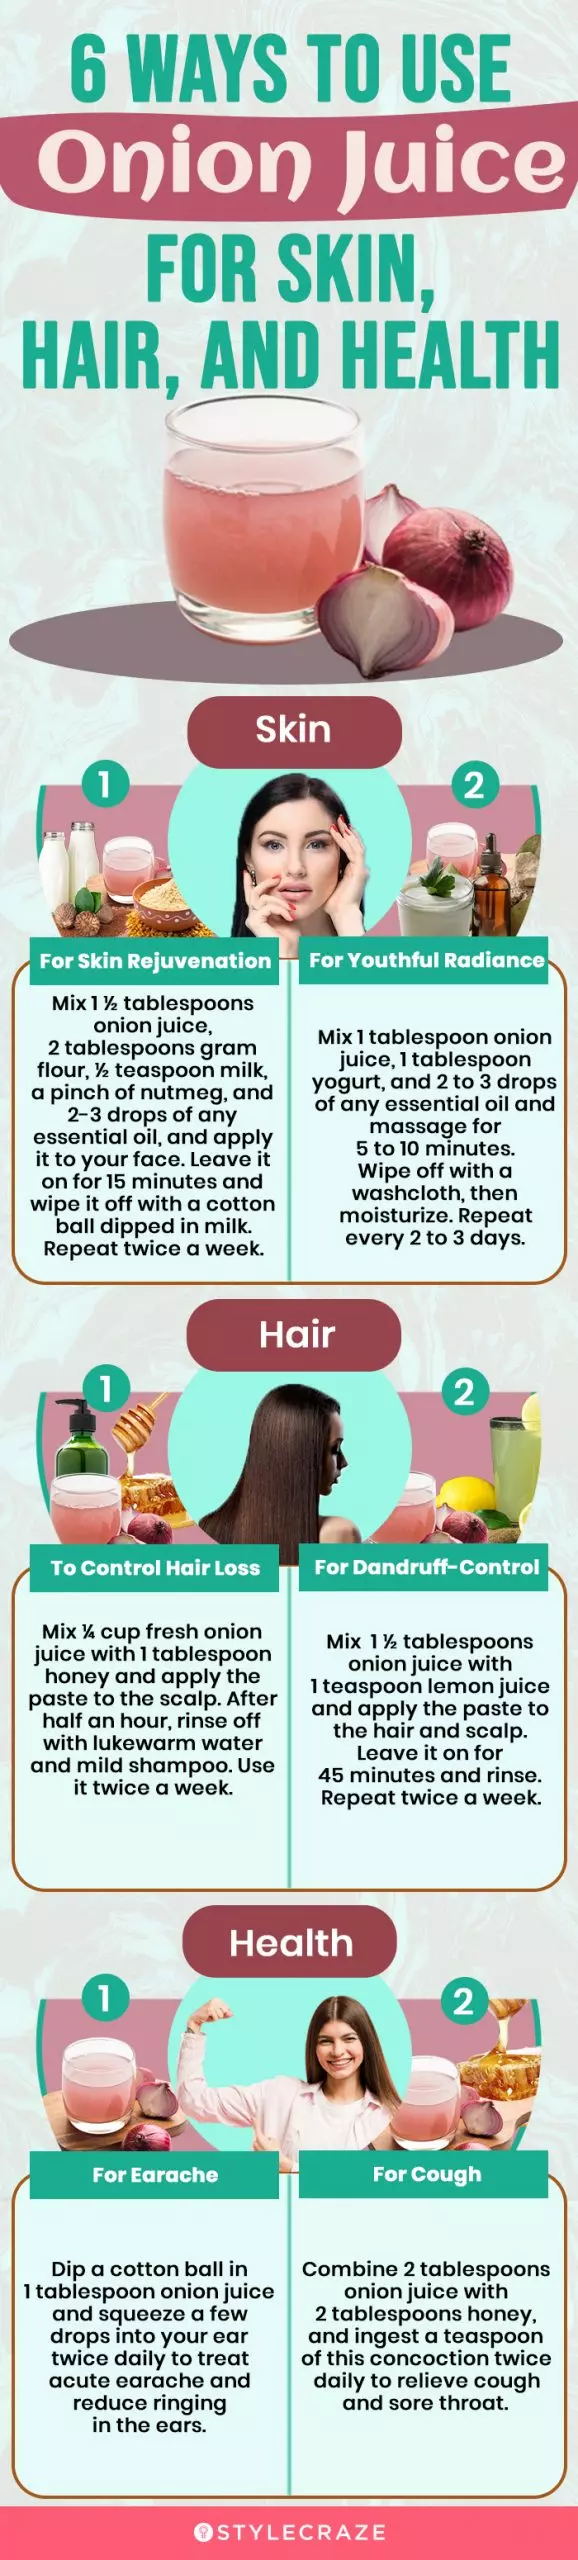 6 ways to use onion juice for skin, hair, and health (infographic)